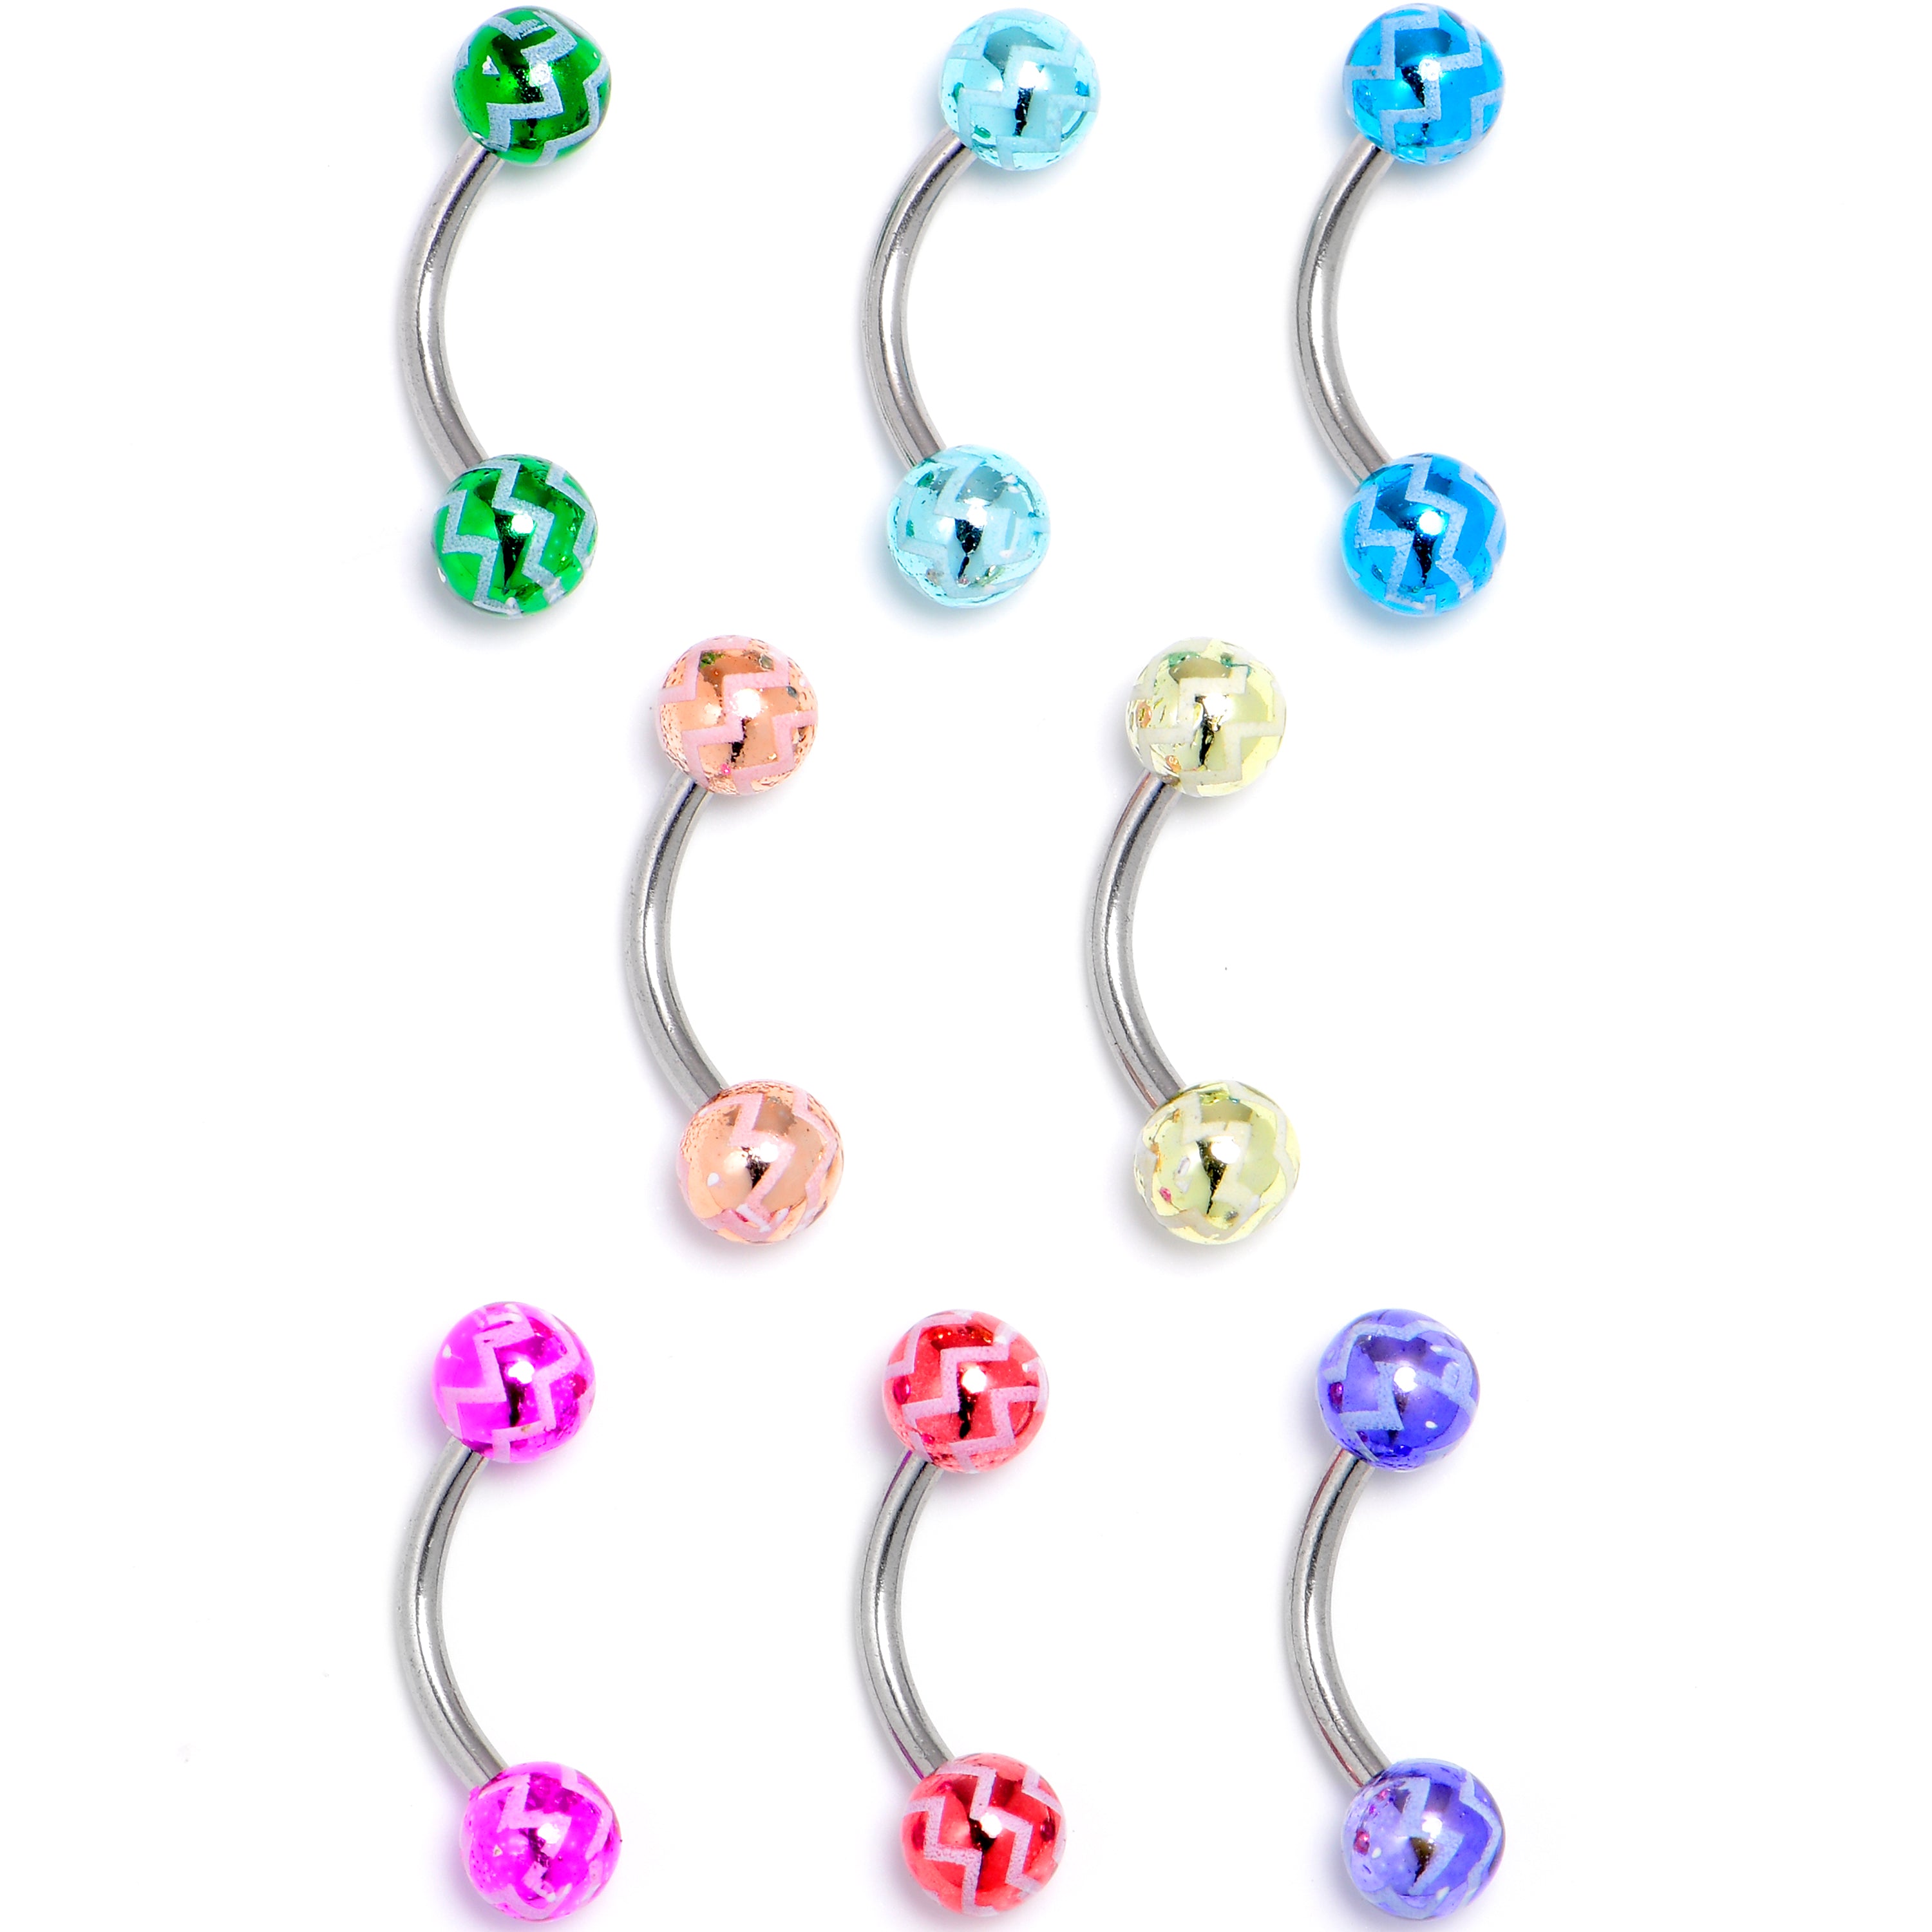 16 Gauge 5/16 Zigzag Multicolor Ends Curved Eyebrow Ring Set of 8